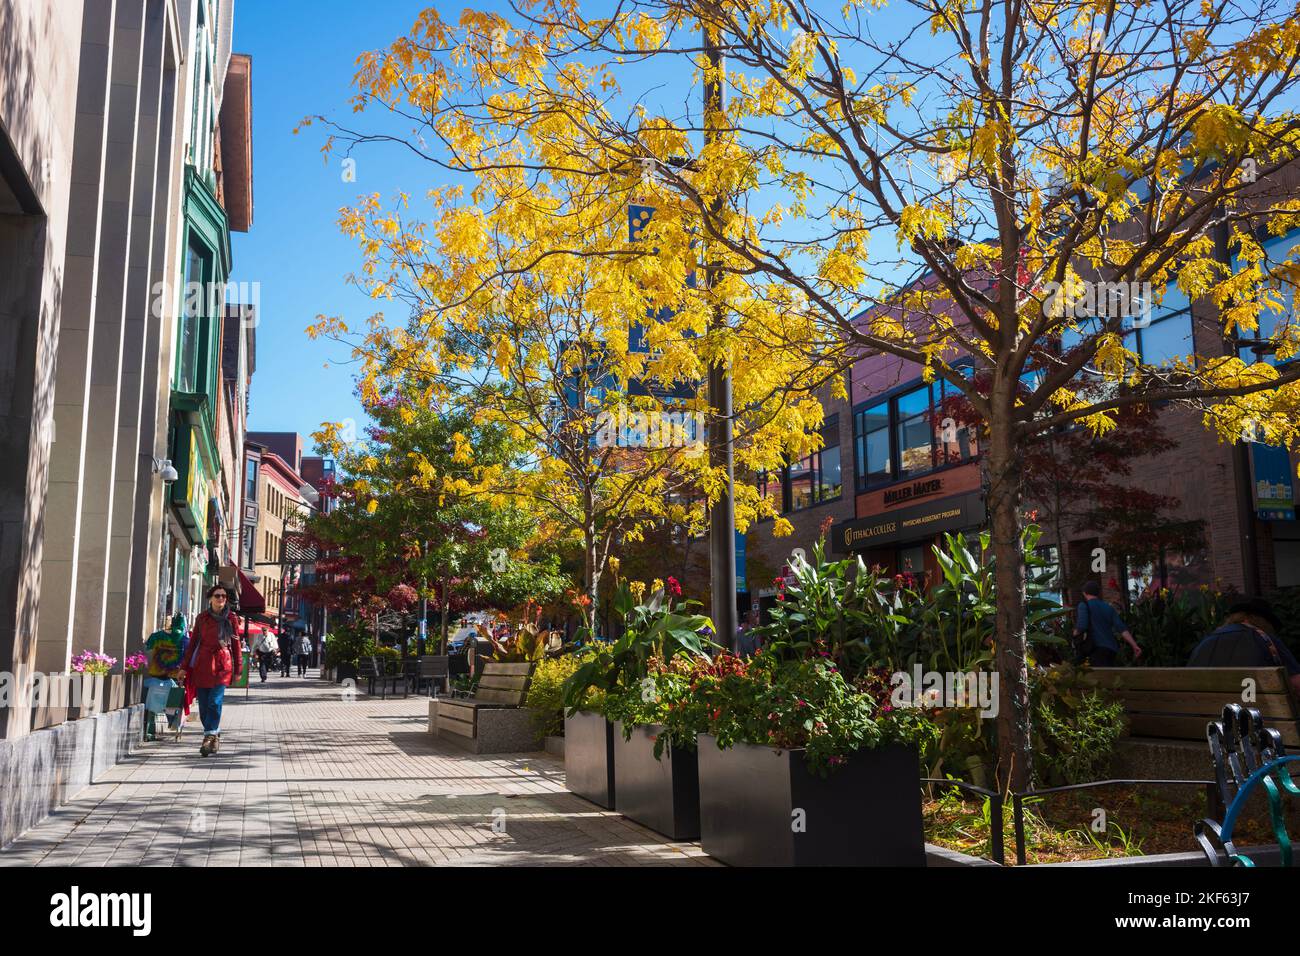 Ithaca, NY, USA - Oct 24, 2022: The Downtown Ithaca Commons, seen here during the autumn season, is a four-block, pedestrian-only home to unique store Stock Photo